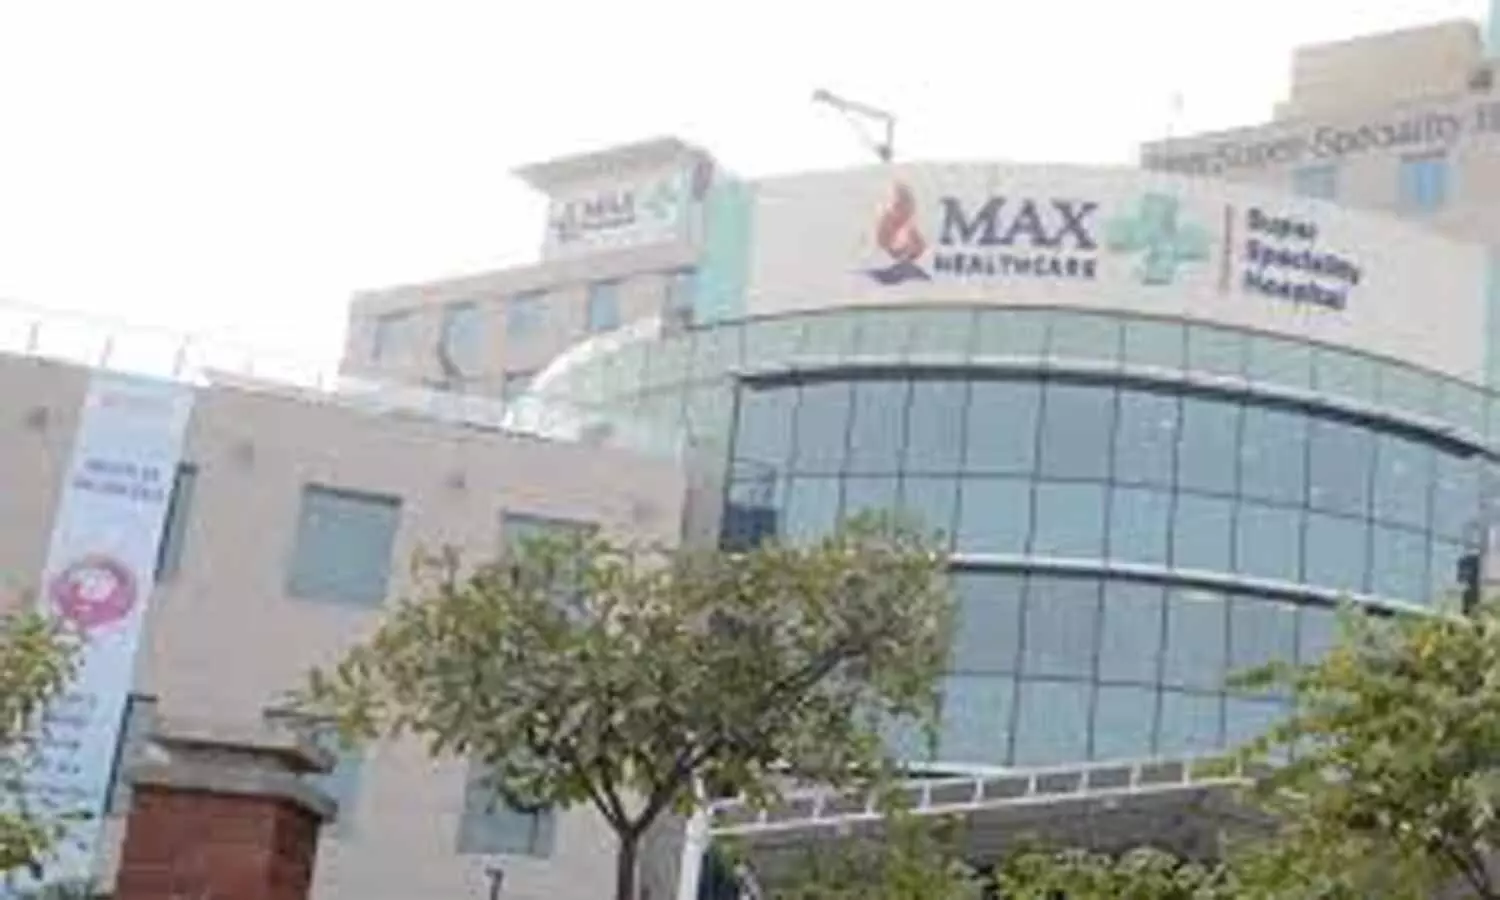 Max Healthcare, Muthoot Hospitals tie-up for 300-bed hospital in Delhi